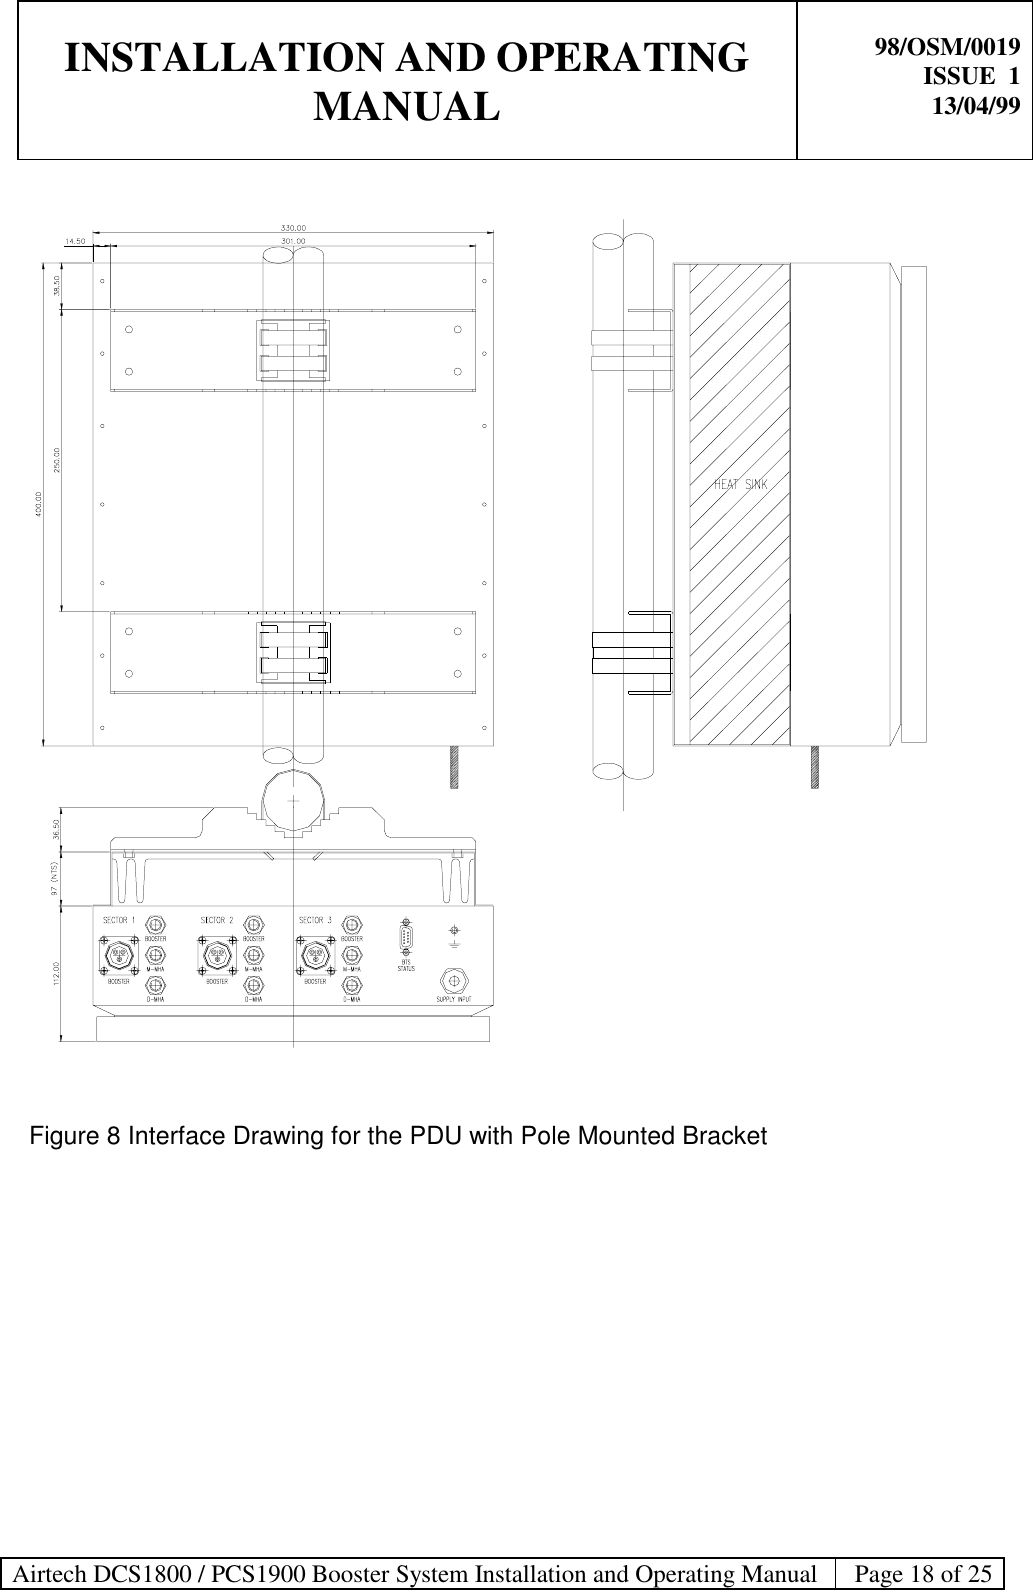 INSTALLATION AND OPERATINGMANUAL98/OSM/0019ISSUE  113/04/99Airtech DCS1800 / PCS1900 Booster System Installation and Operating Manual Page 18 of 25Figure 8 Interface Drawing for the PDU with Pole Mounted Bracket